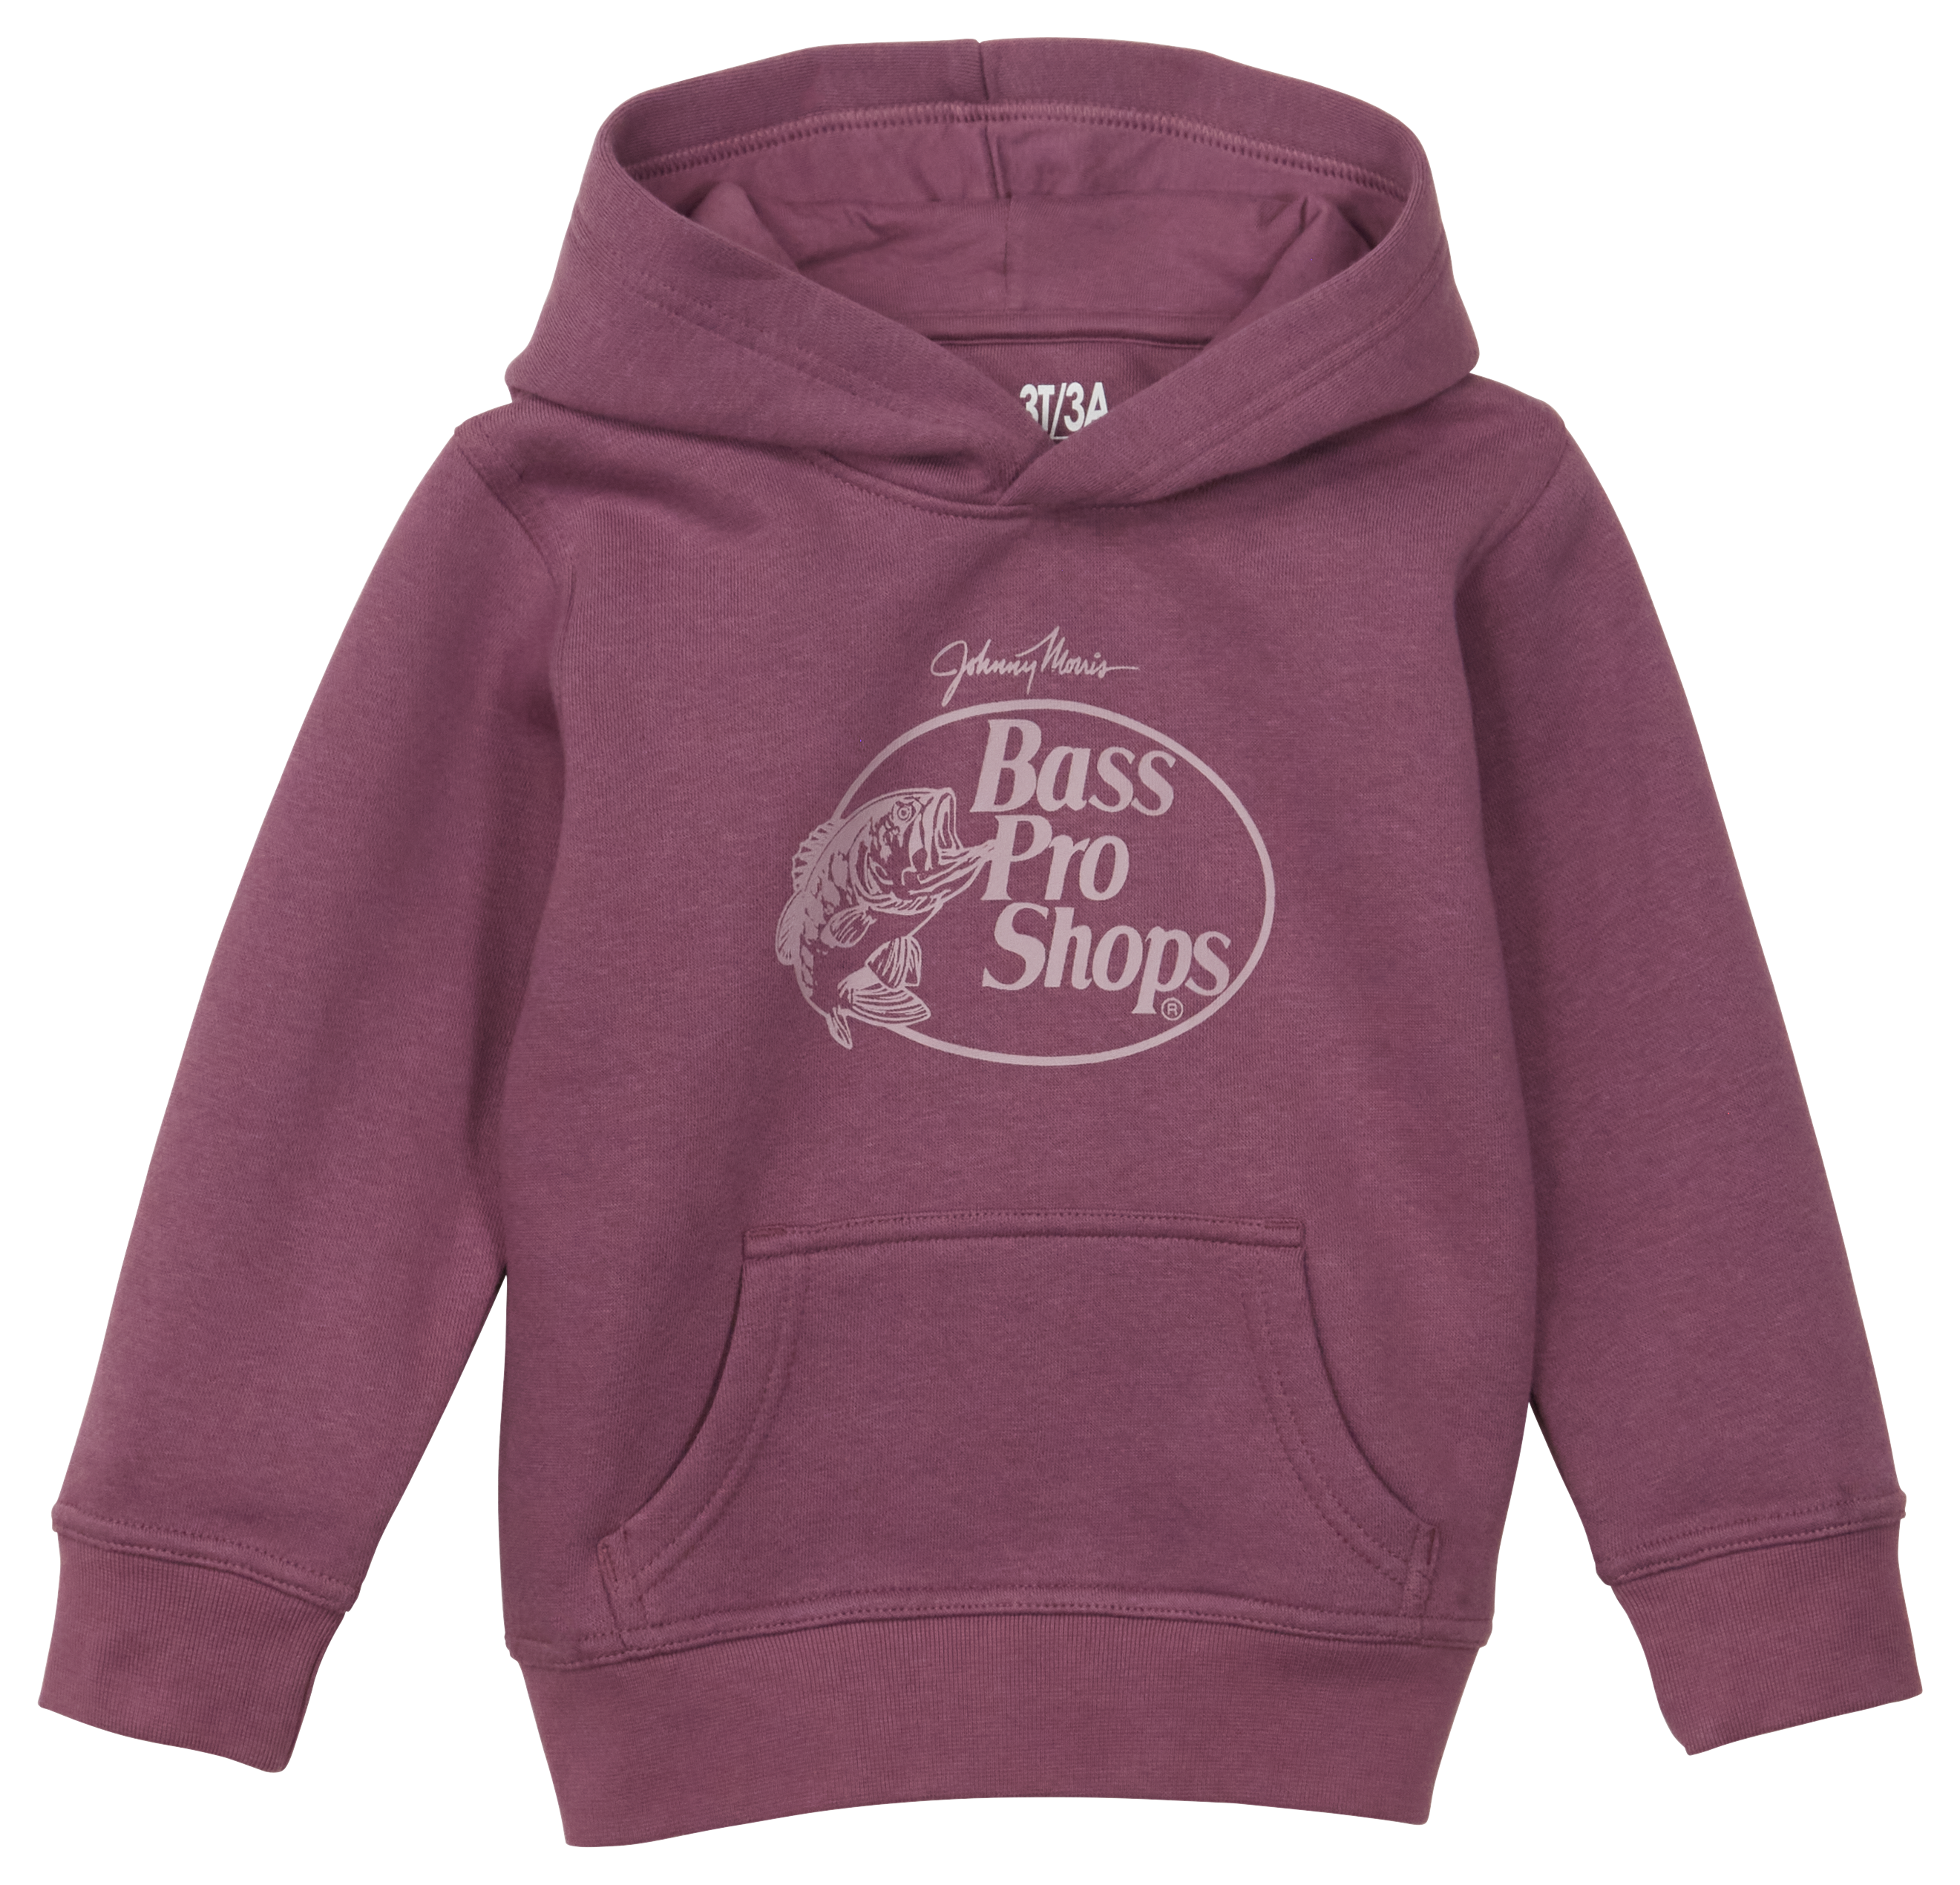 Bass Pro Shops Logo Long-Sleeve Hoodie for Toddlers or Kids